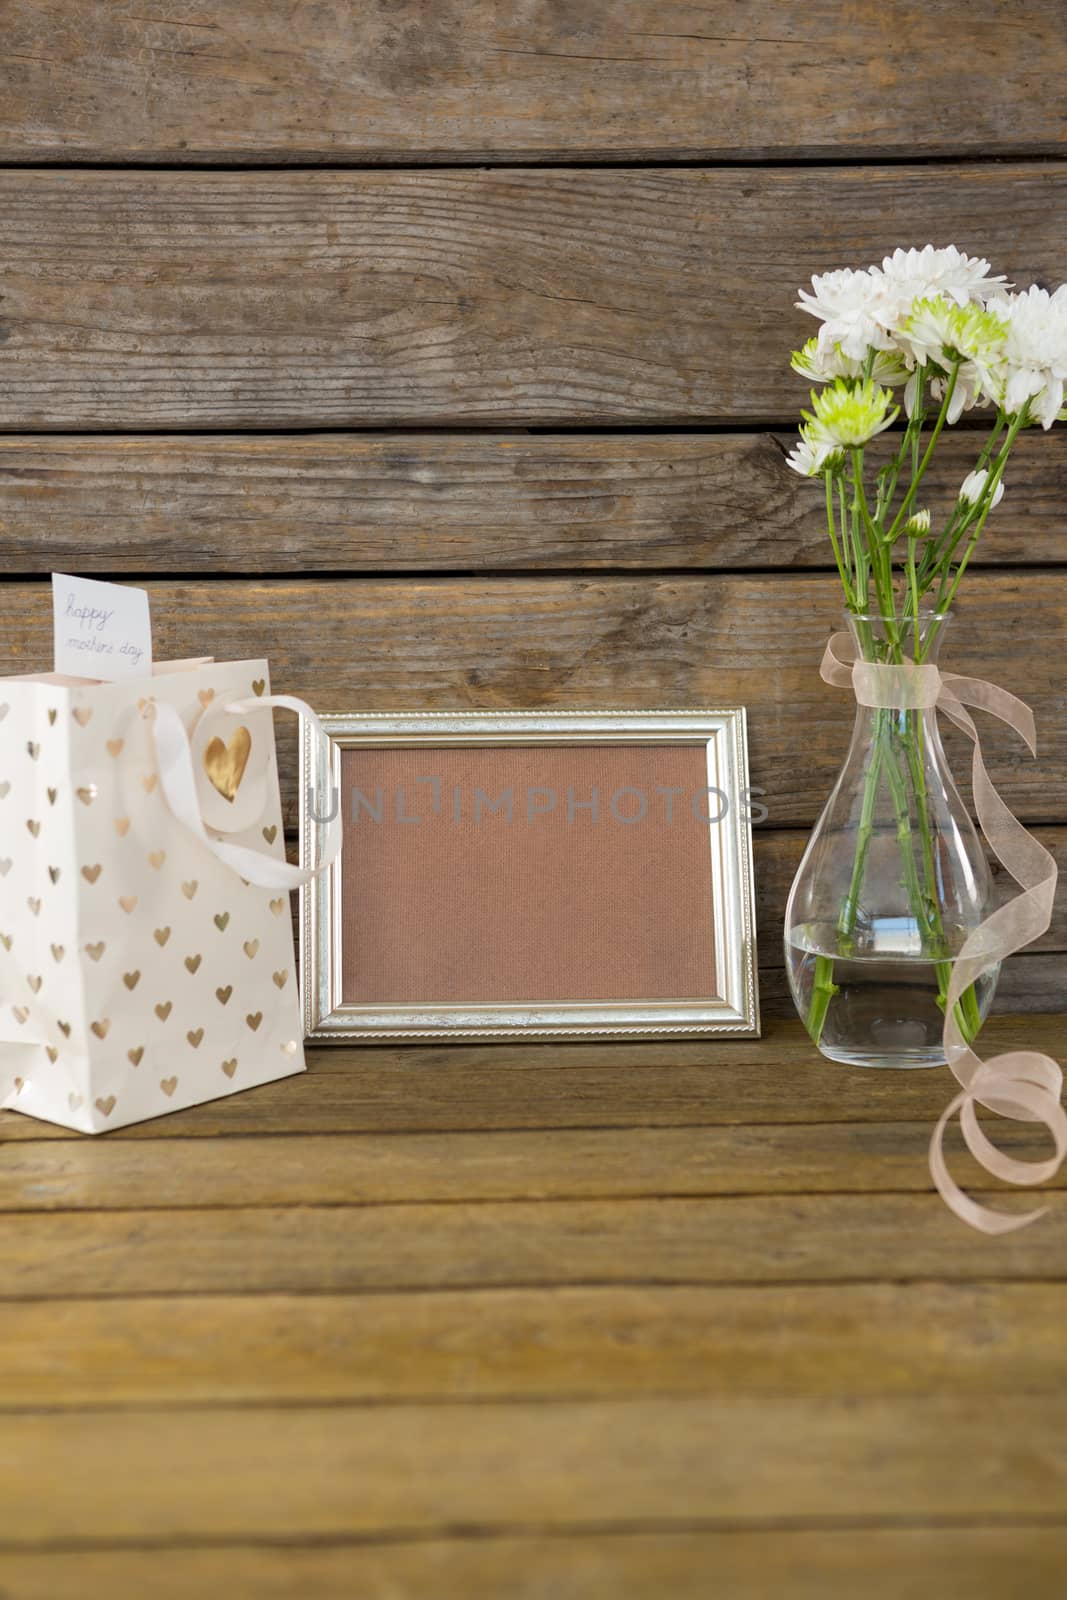 Gift bag, photo frame and flower vase on wooden surface by Wavebreakmedia